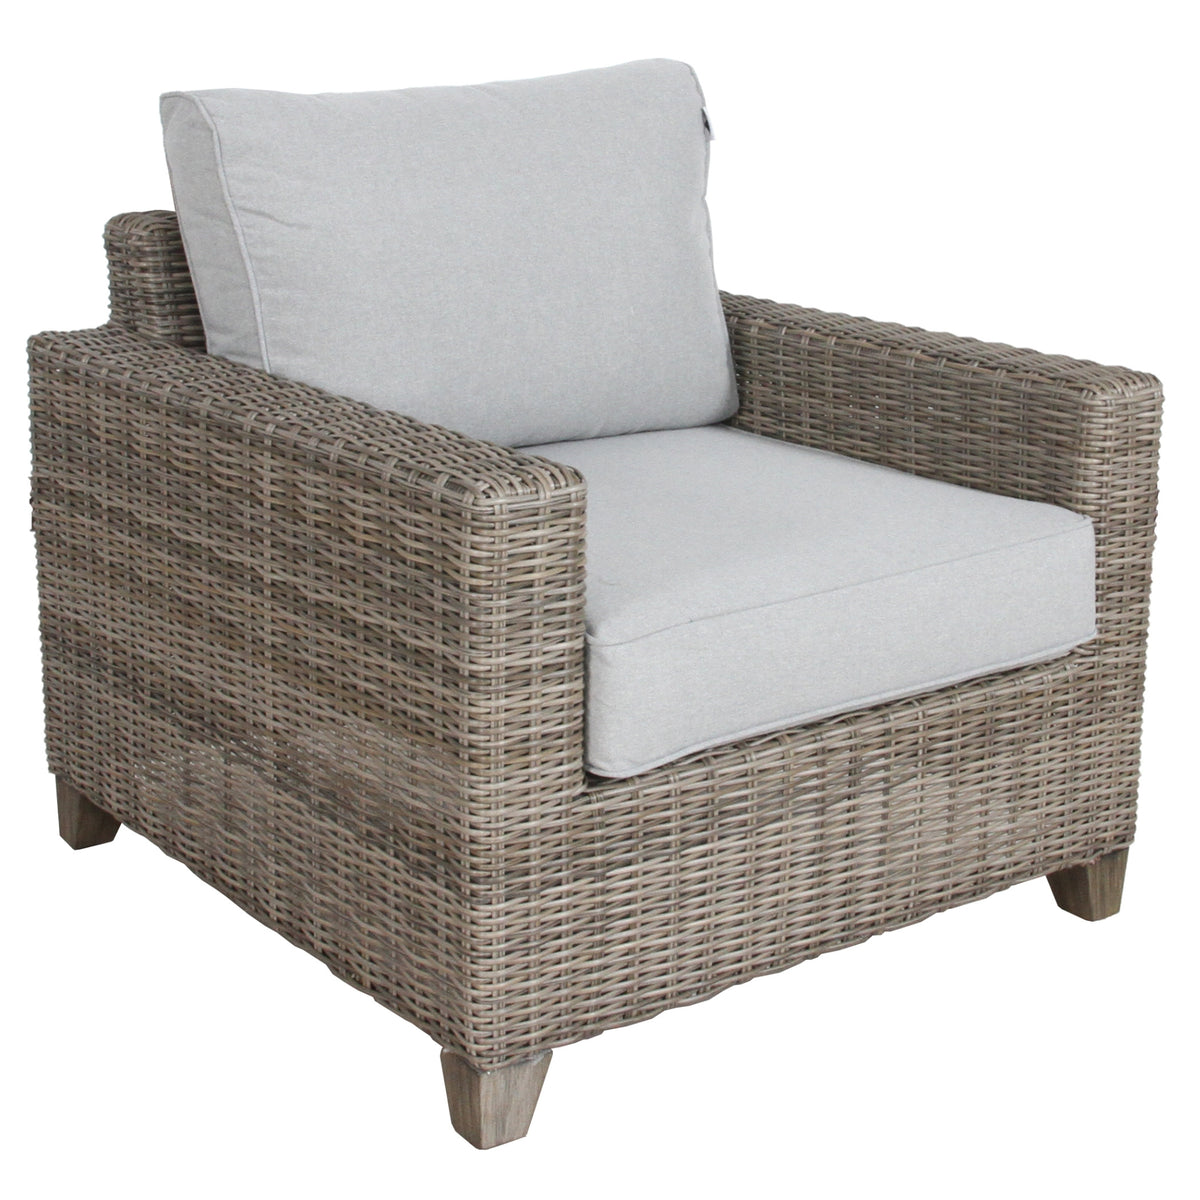 Sophy 1 Seater Wicker Rattan Outdoor Sofa Chair Lounge